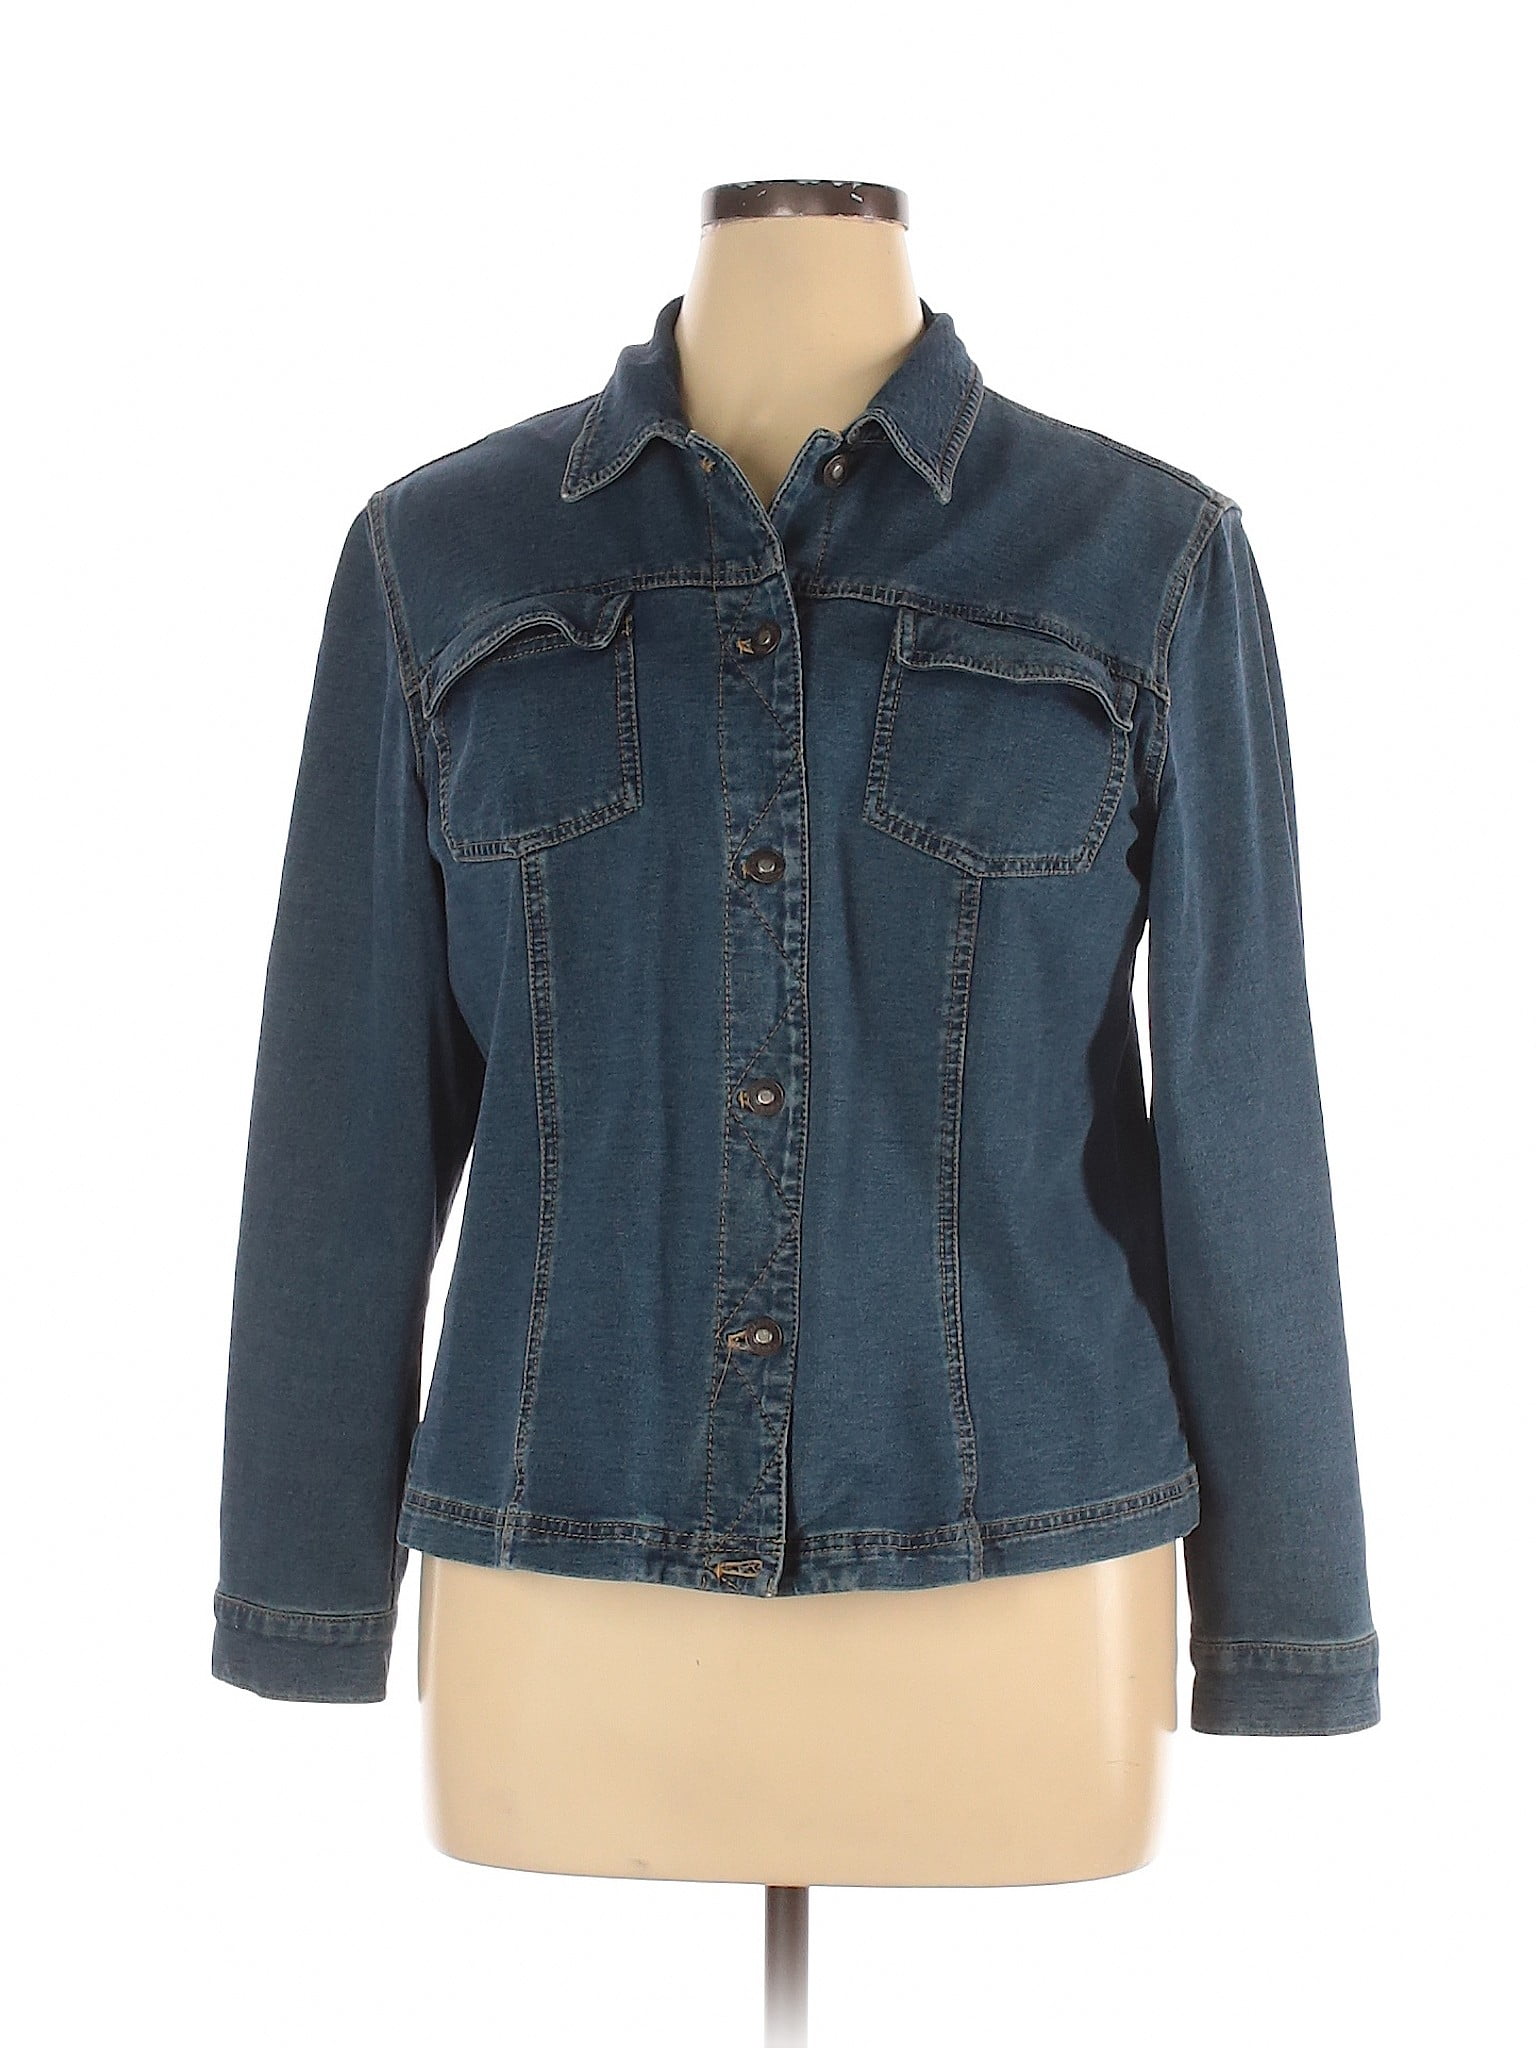 Coldwater Creek - Pre-Owned Coldwater Creek Women's Size XL Denim ...